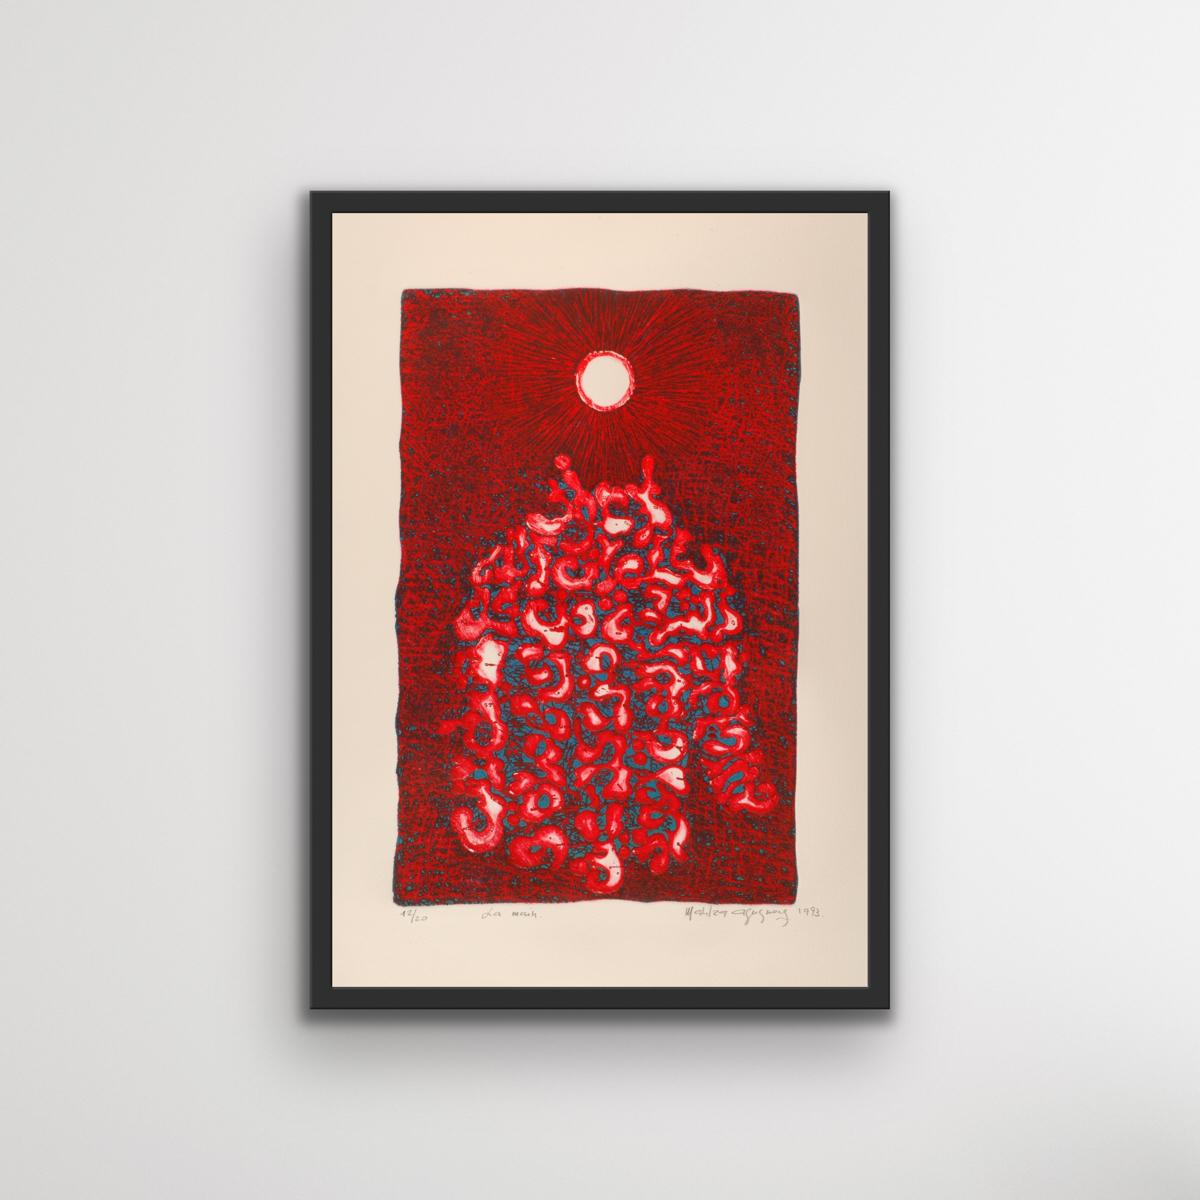 Bright red, blue, and white abstract etching on paper by Moroccan artist Malika Agueznay. Limited edition. Edition 12/20. Signed. Offered framed.

Malika Agueznay (1938) is a pioneer Moroccan abstract painter and engraver. Her artwork features